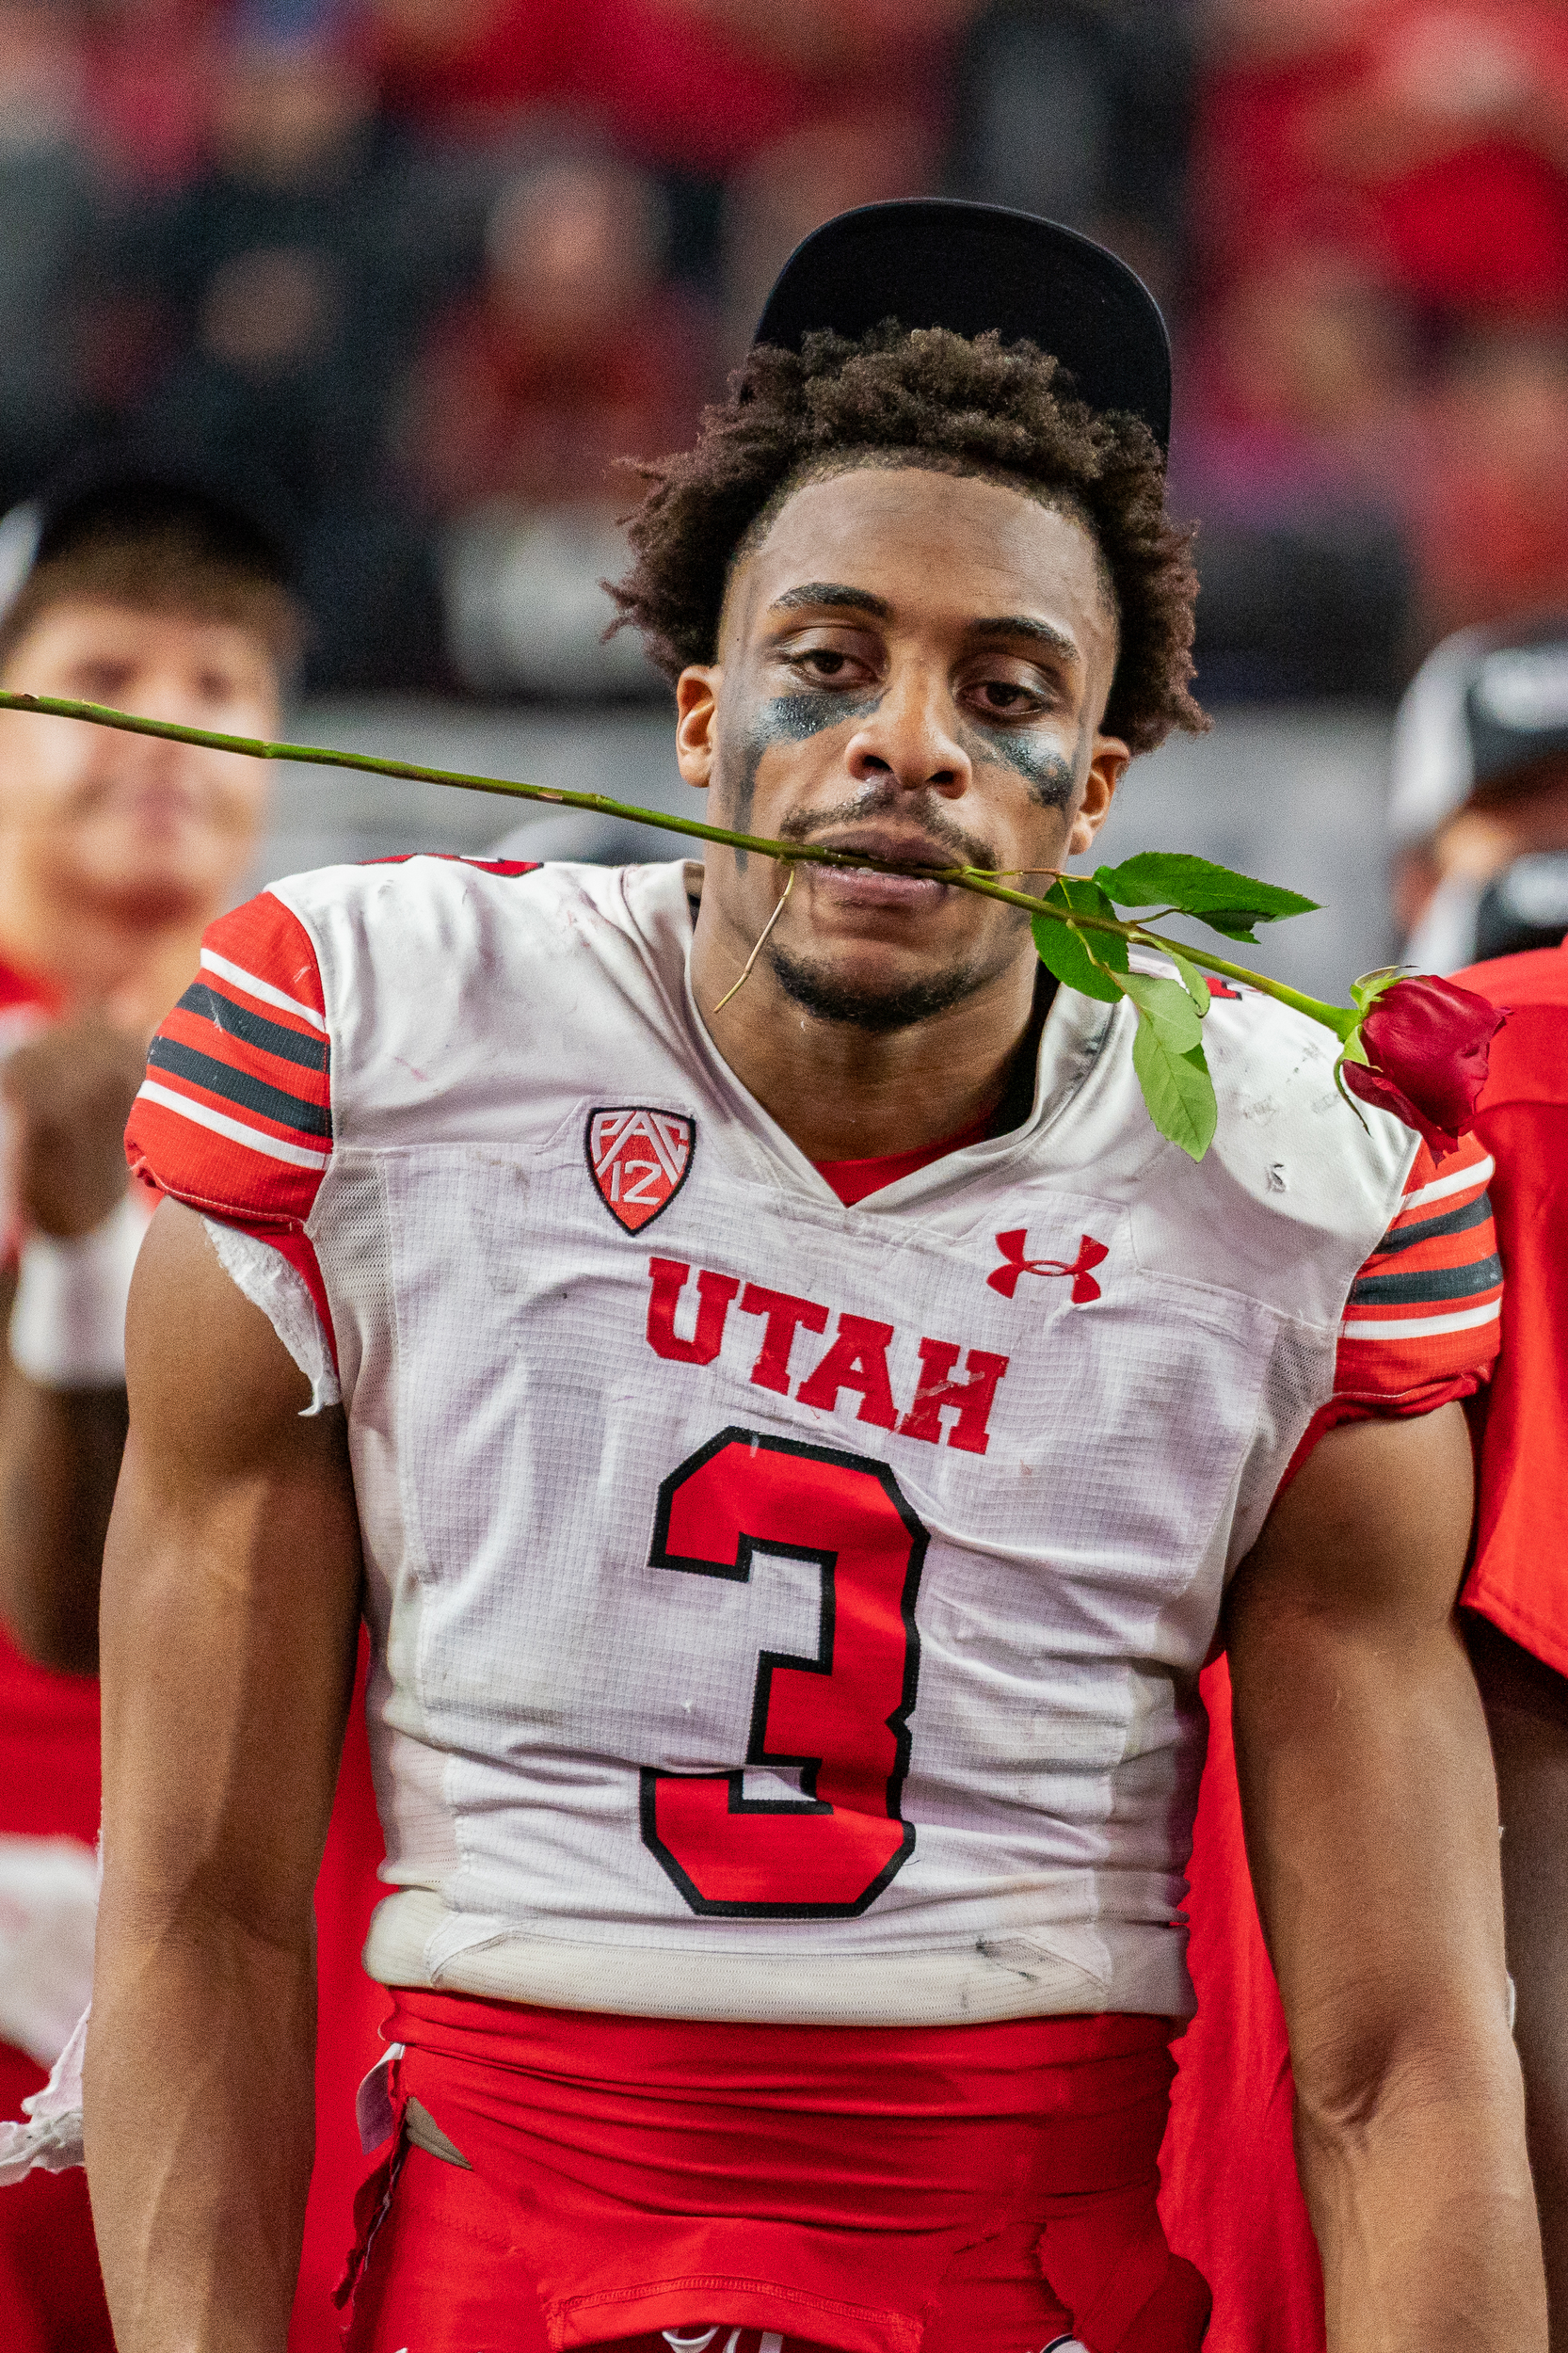 Utah player holding a rose with his mouth after winning the Pac-12 Championship Game.